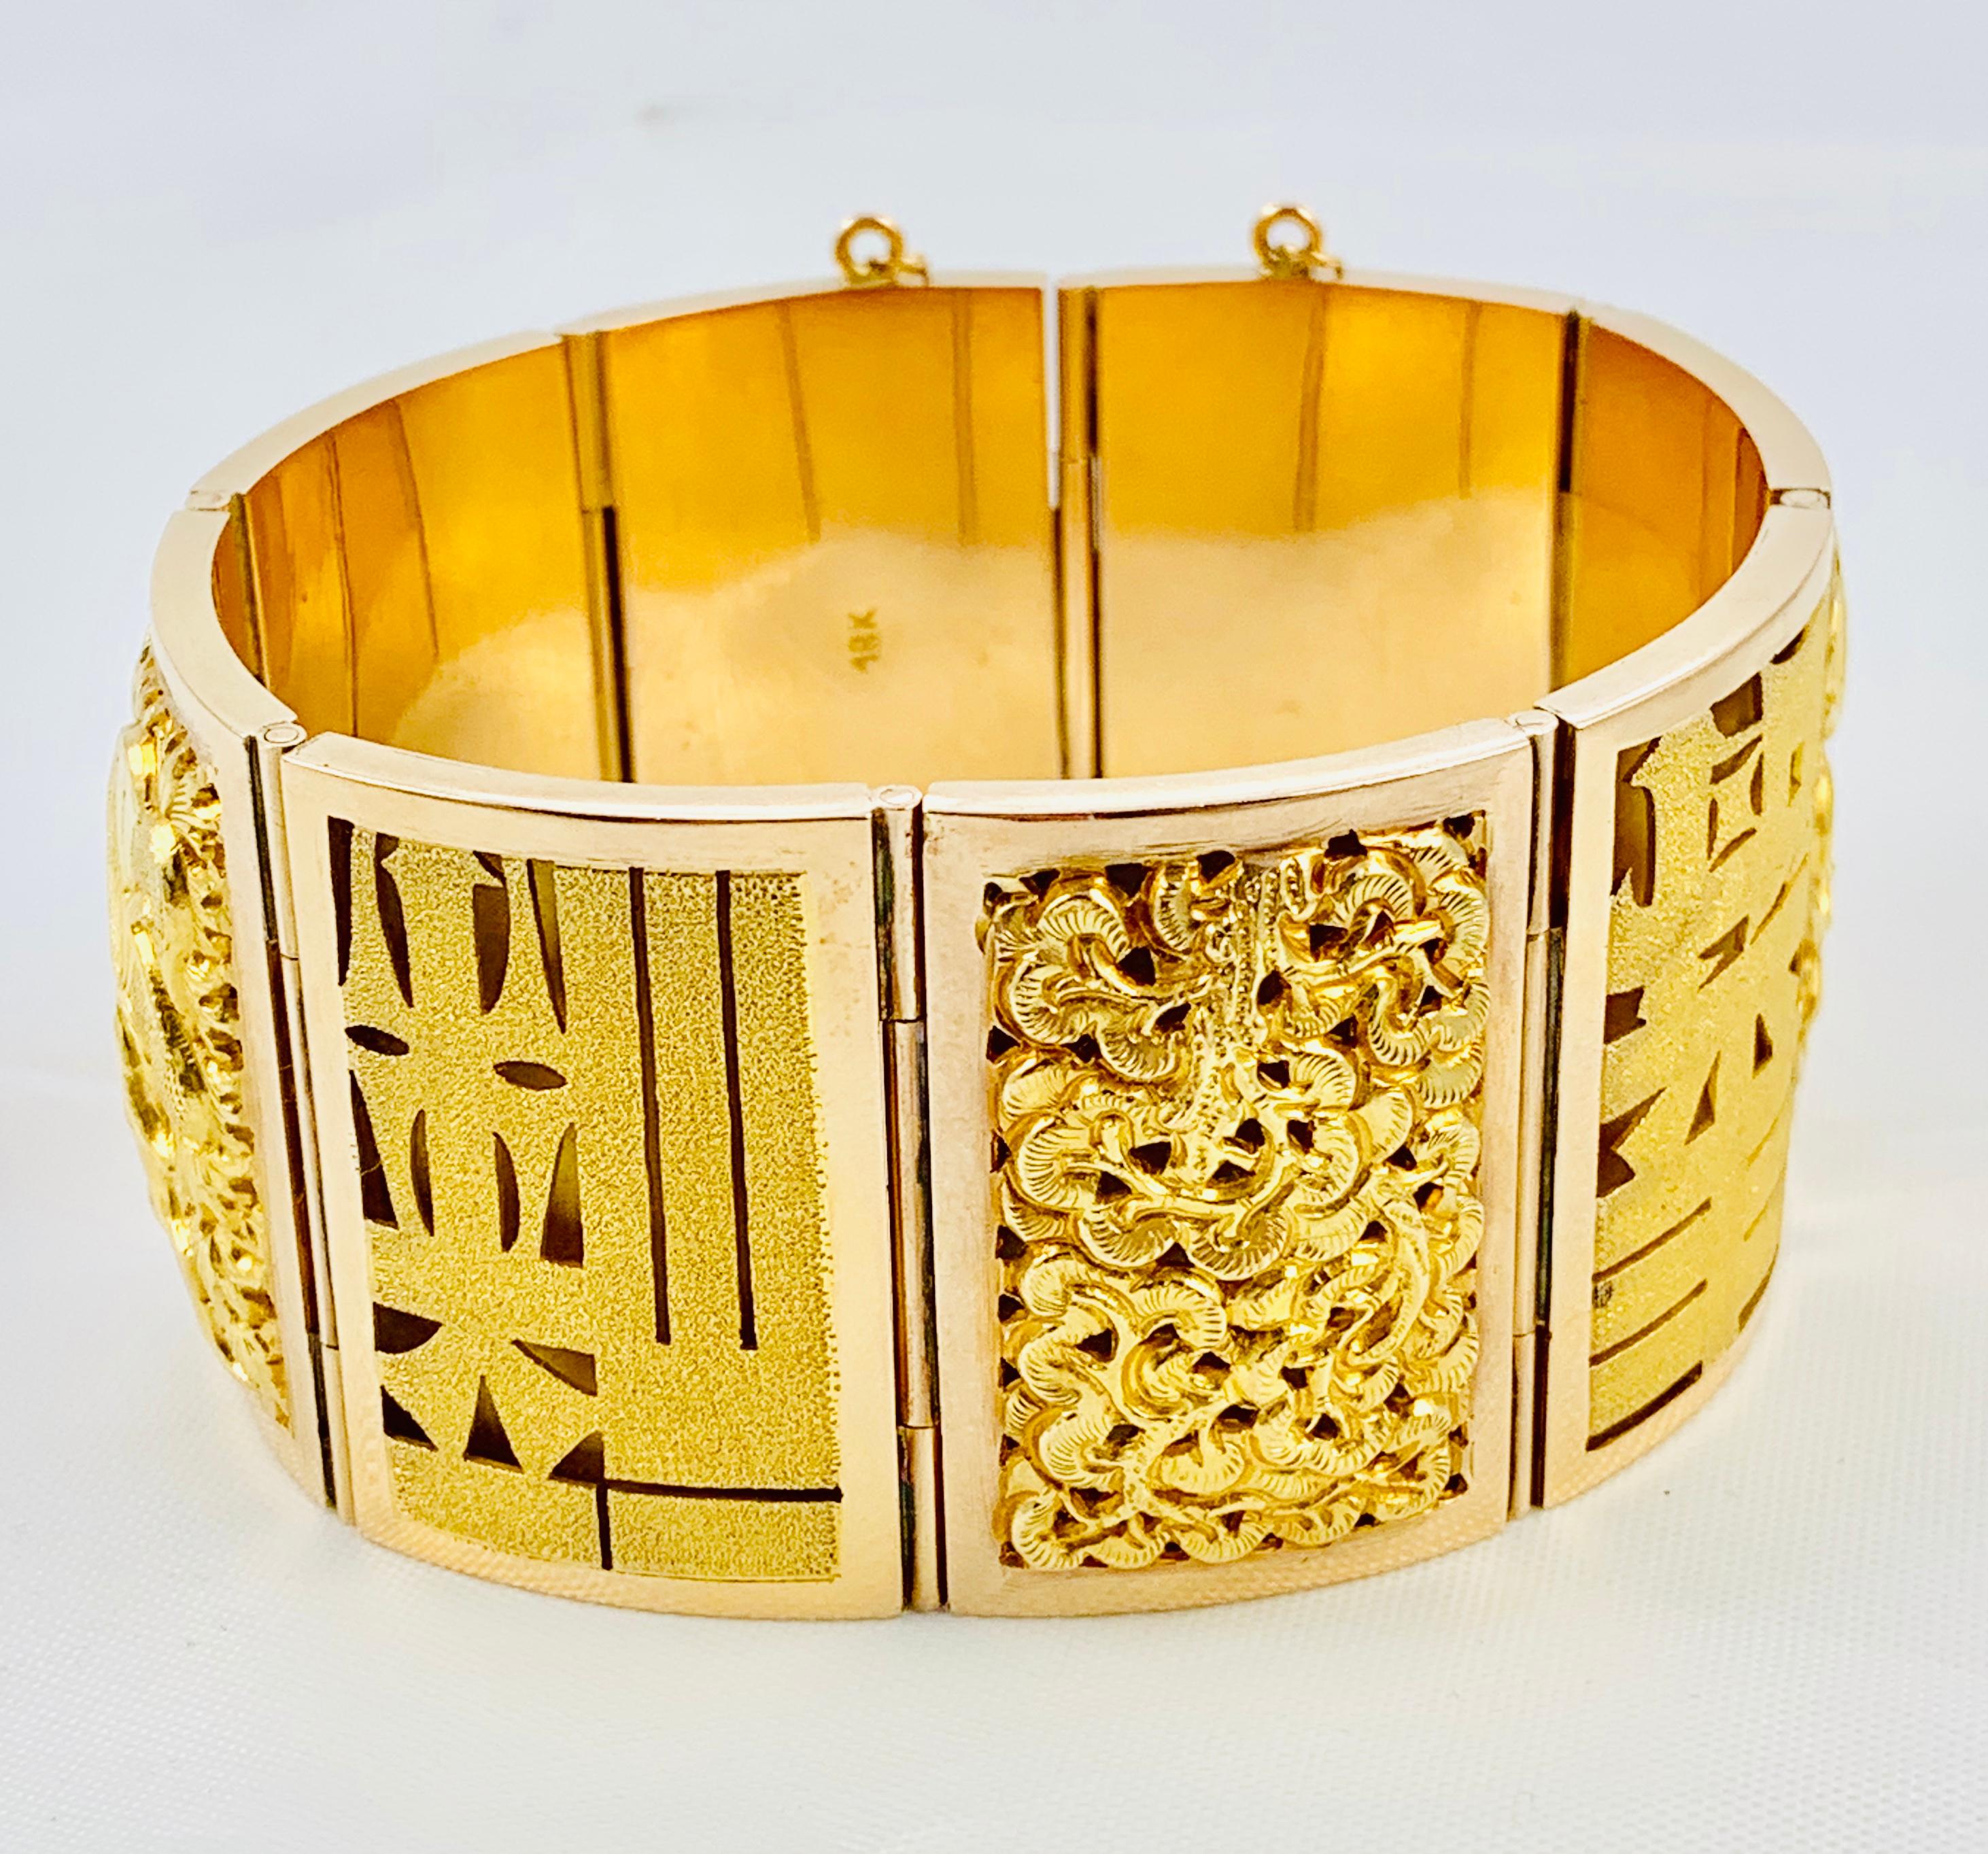 This bracelet is such a stunning piece! It is an estate bracelet made in 18K yellow Gold and features 8 sections of oriental themed plaques. This is a large bracelet that measures 1 &1/2 inches wide and weighs 98.5 grams. It is extremely comfortable